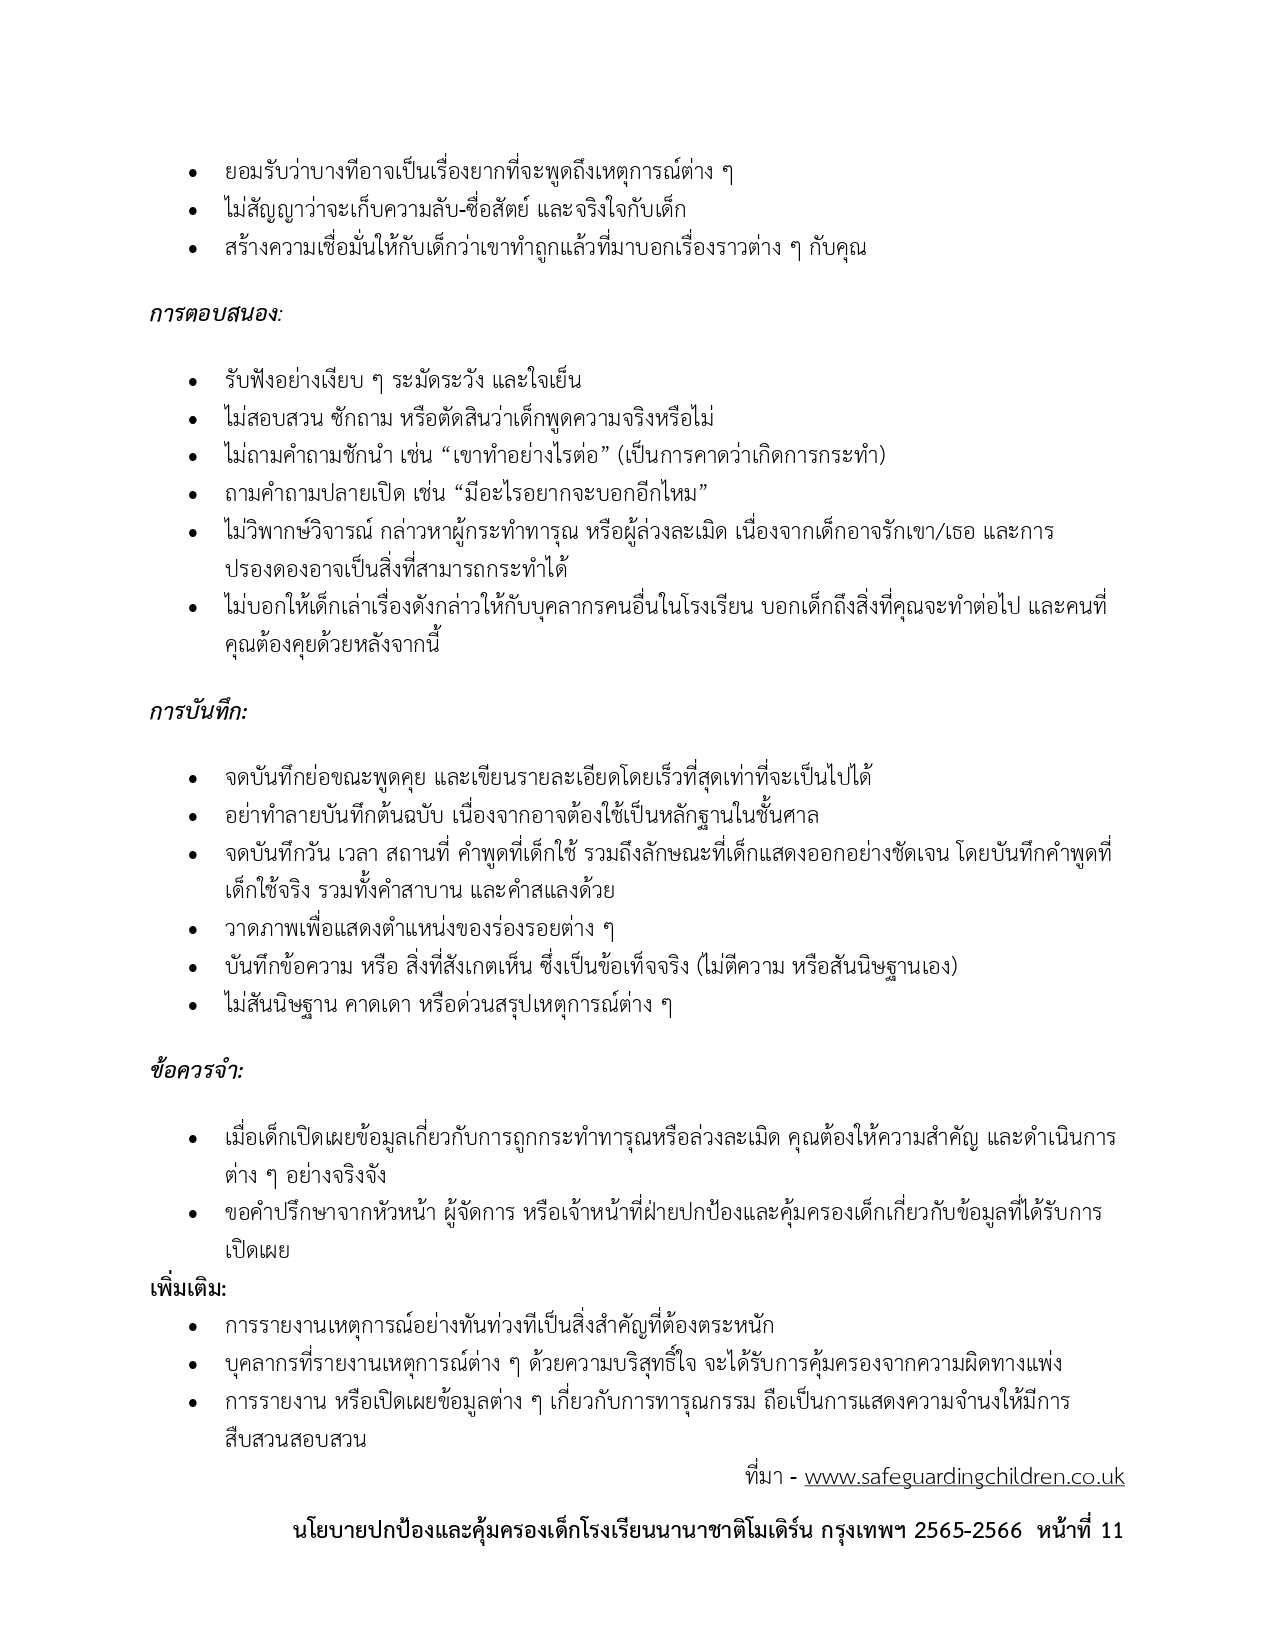 Child Protection Policy Thai Version page 0011